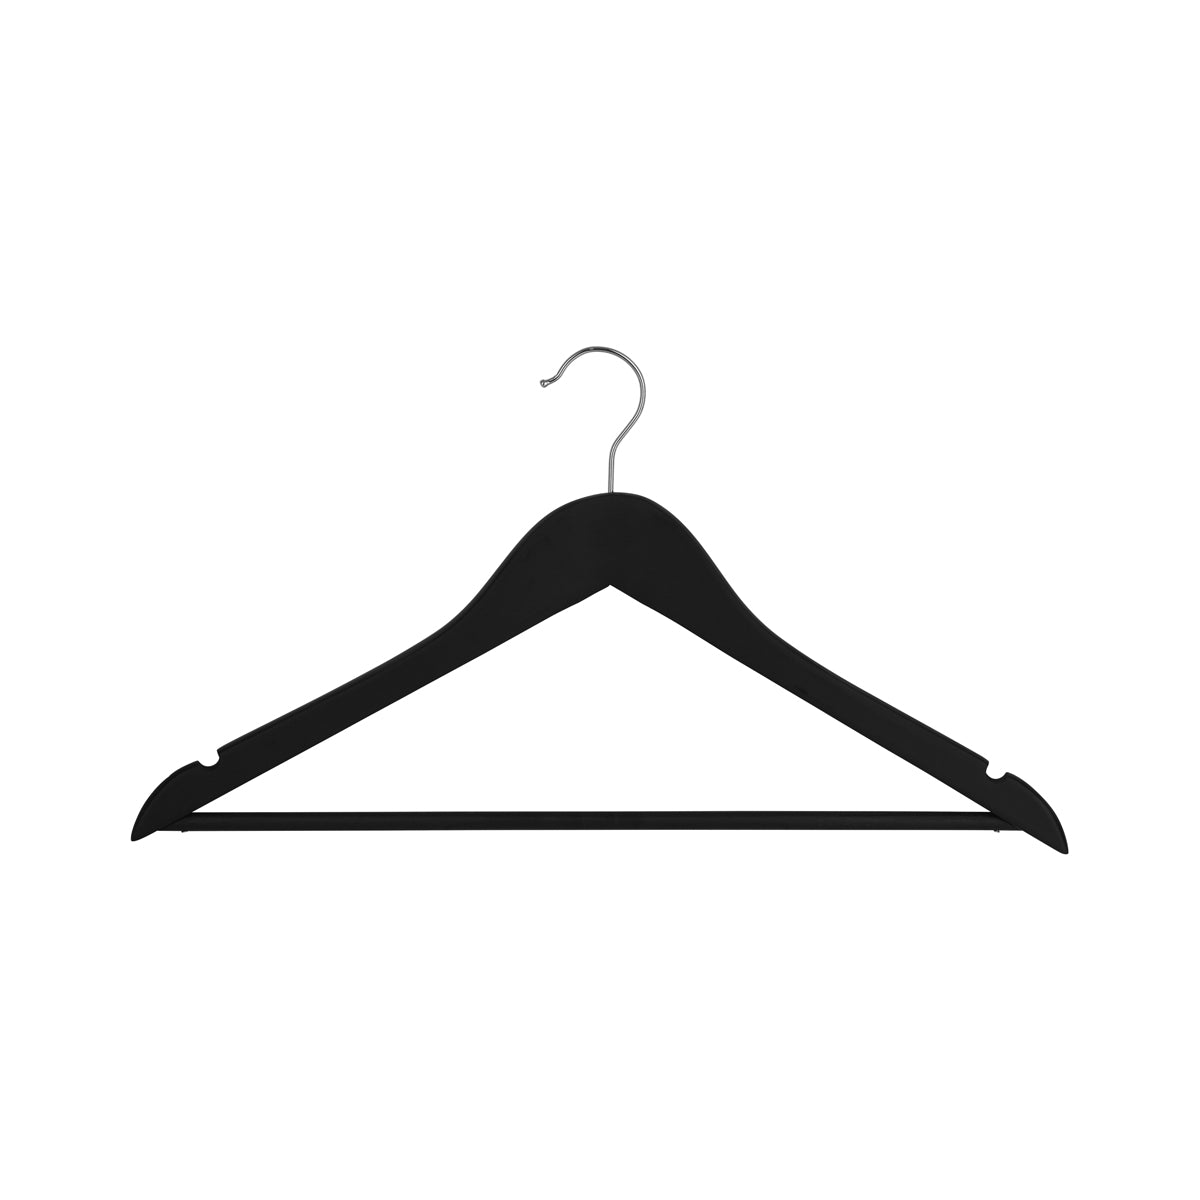 9000-21 Noble & Price Hanger Standard with Hook Black 445x230x12mm Tomkin Australia Hospitality Supplies